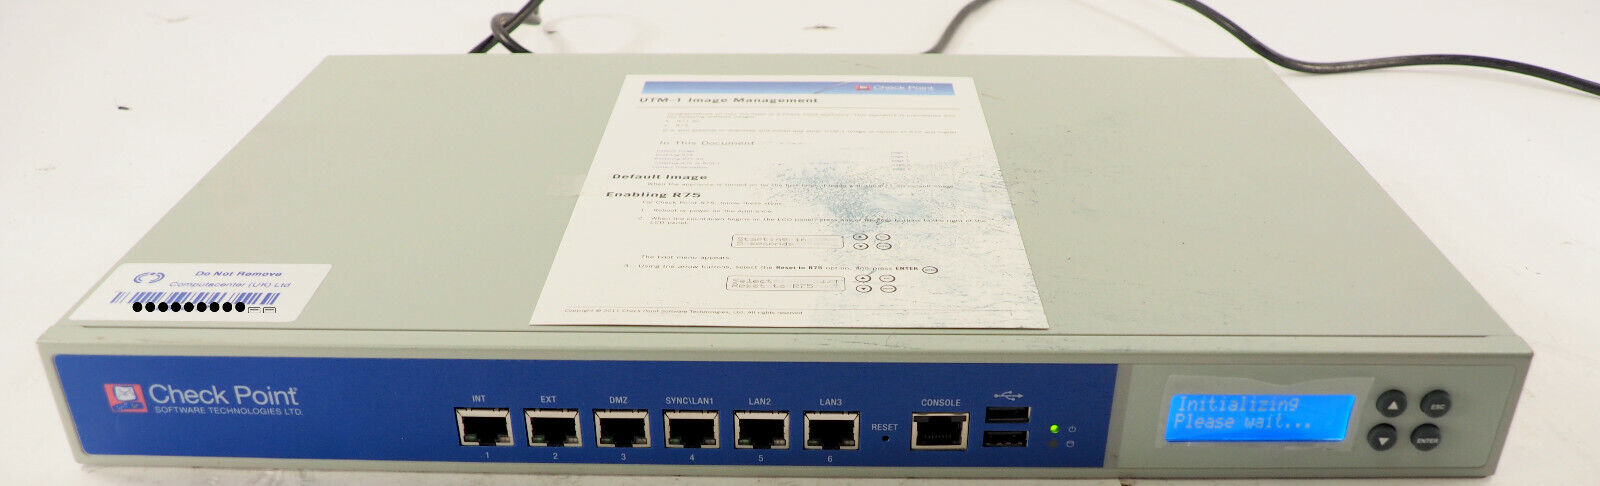 Checkpoint U-20 Network Security Appliance Firewall